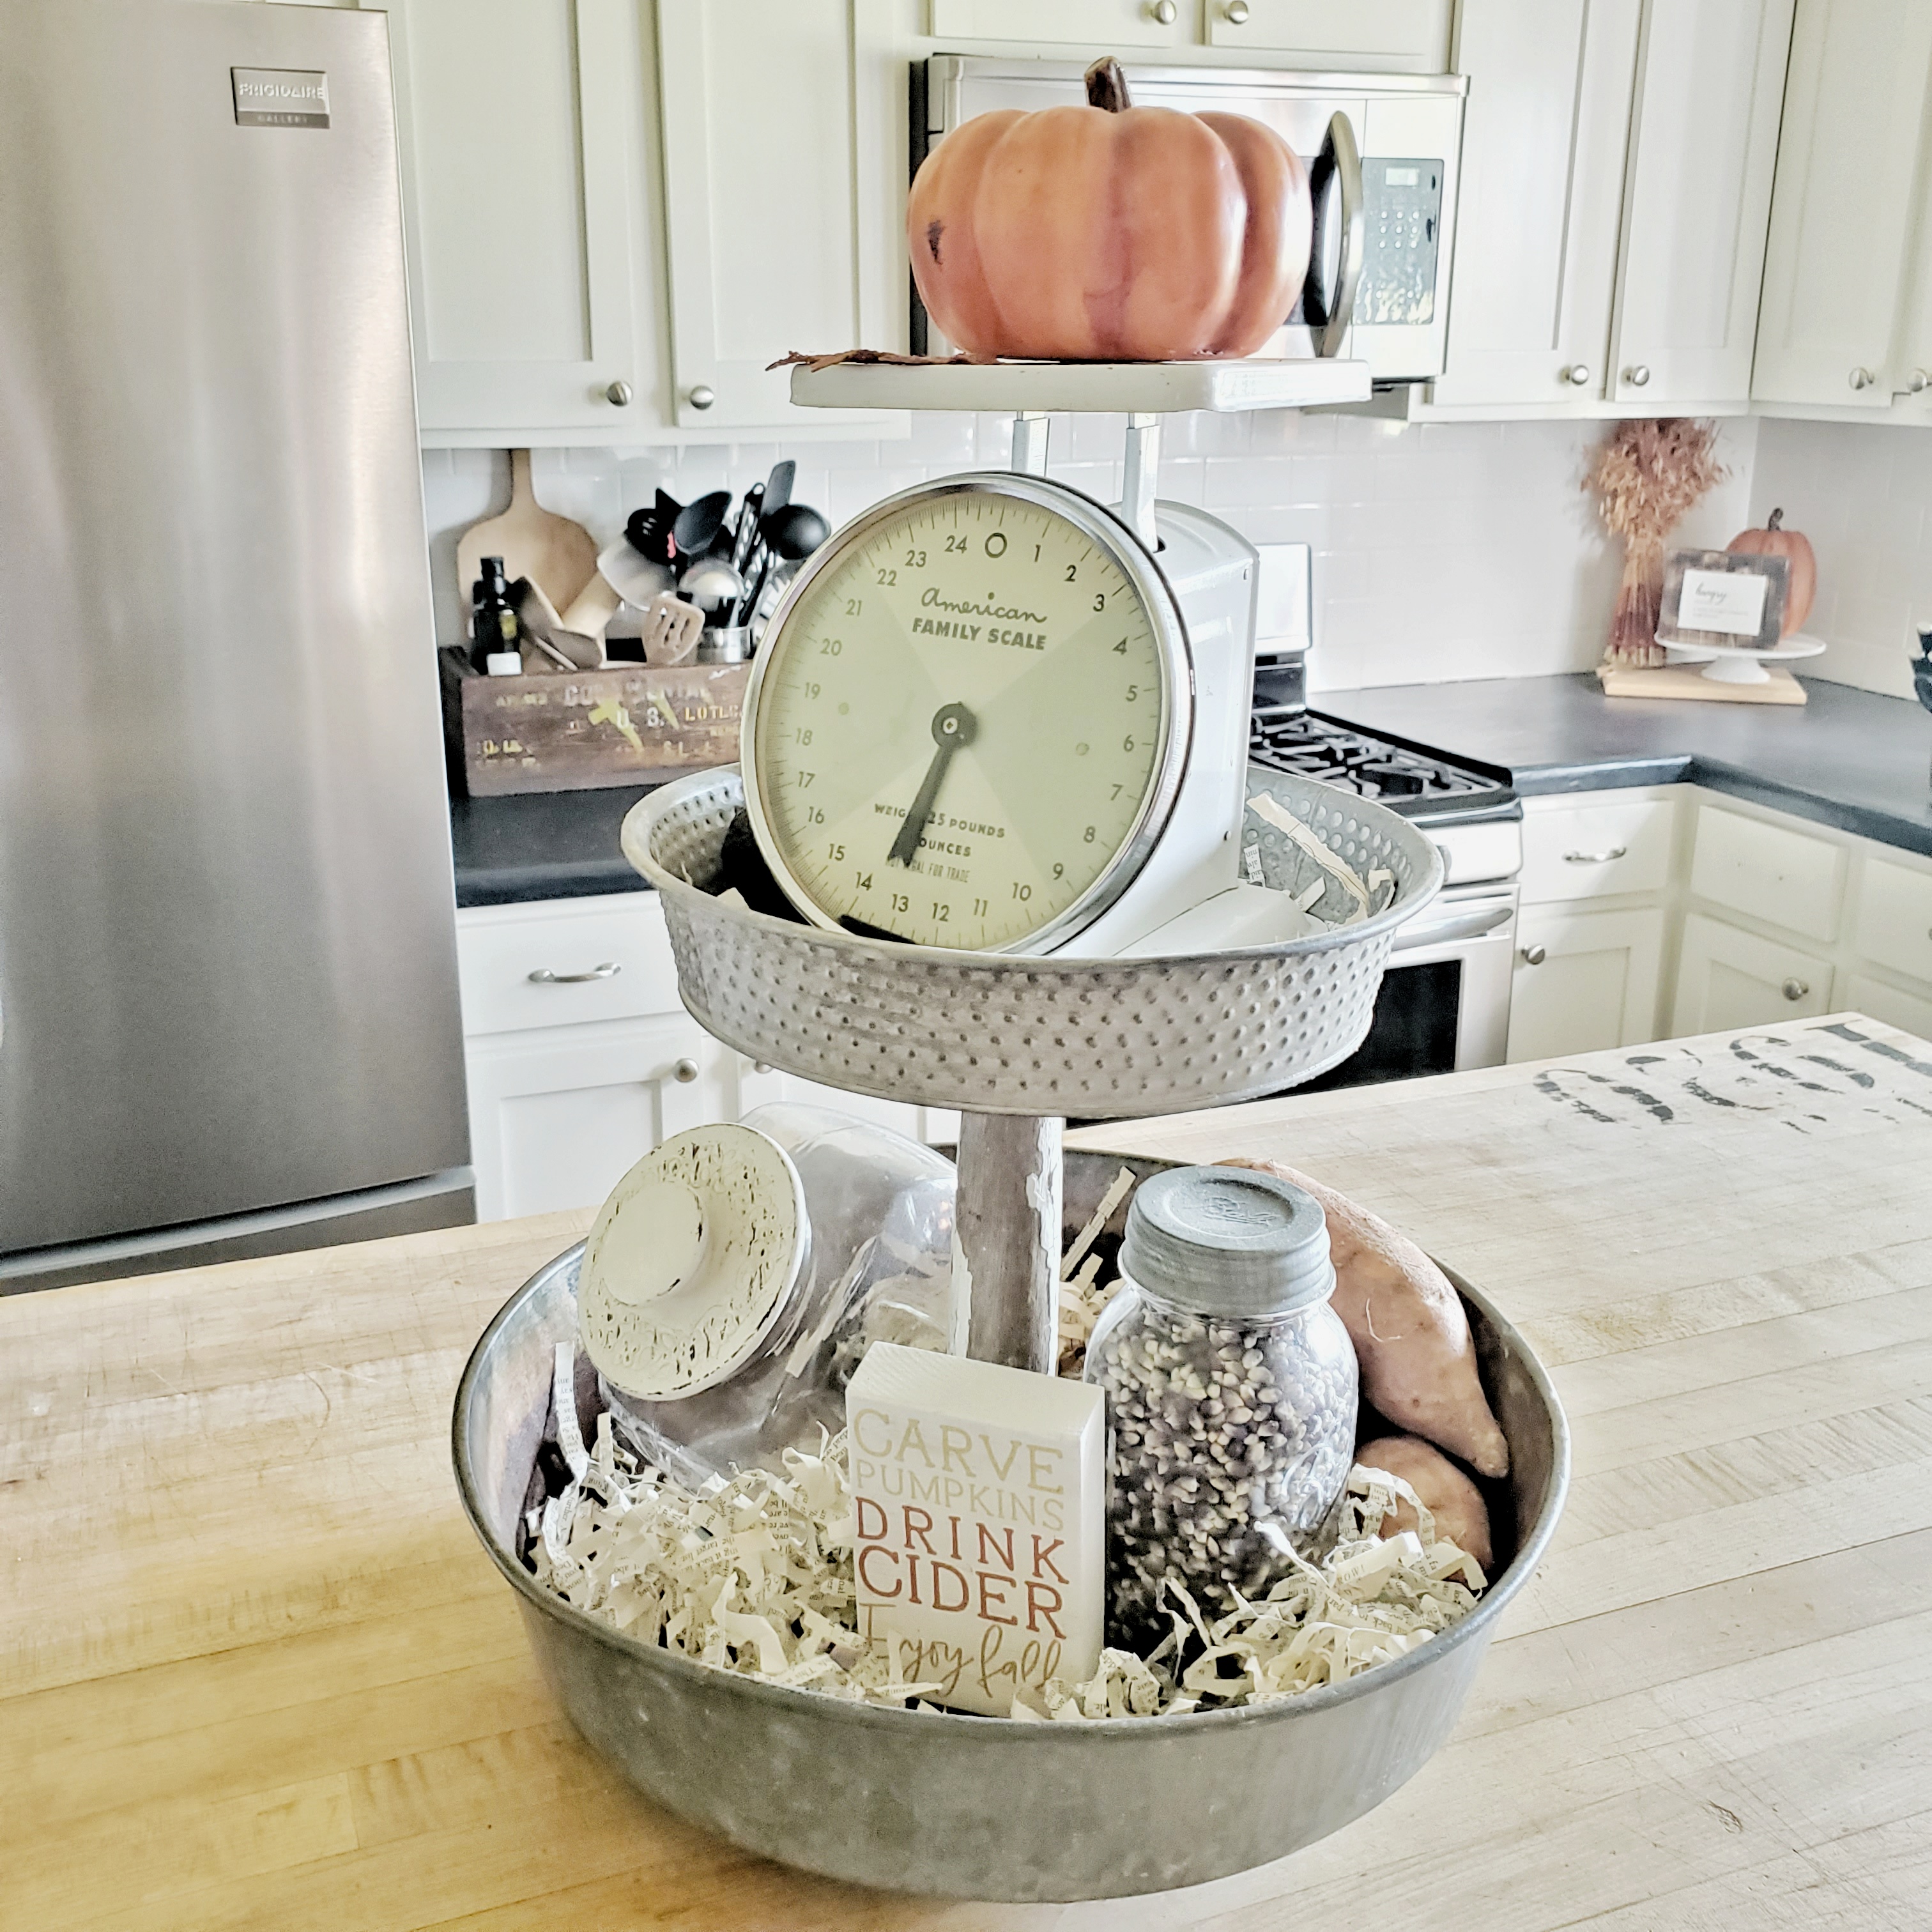 Repurposed oil pan and banister spindle tiered tray for your island.  The metal looks great against the reclaimed butcher block countertop.  Filled with fresh produce and a vintage scale.